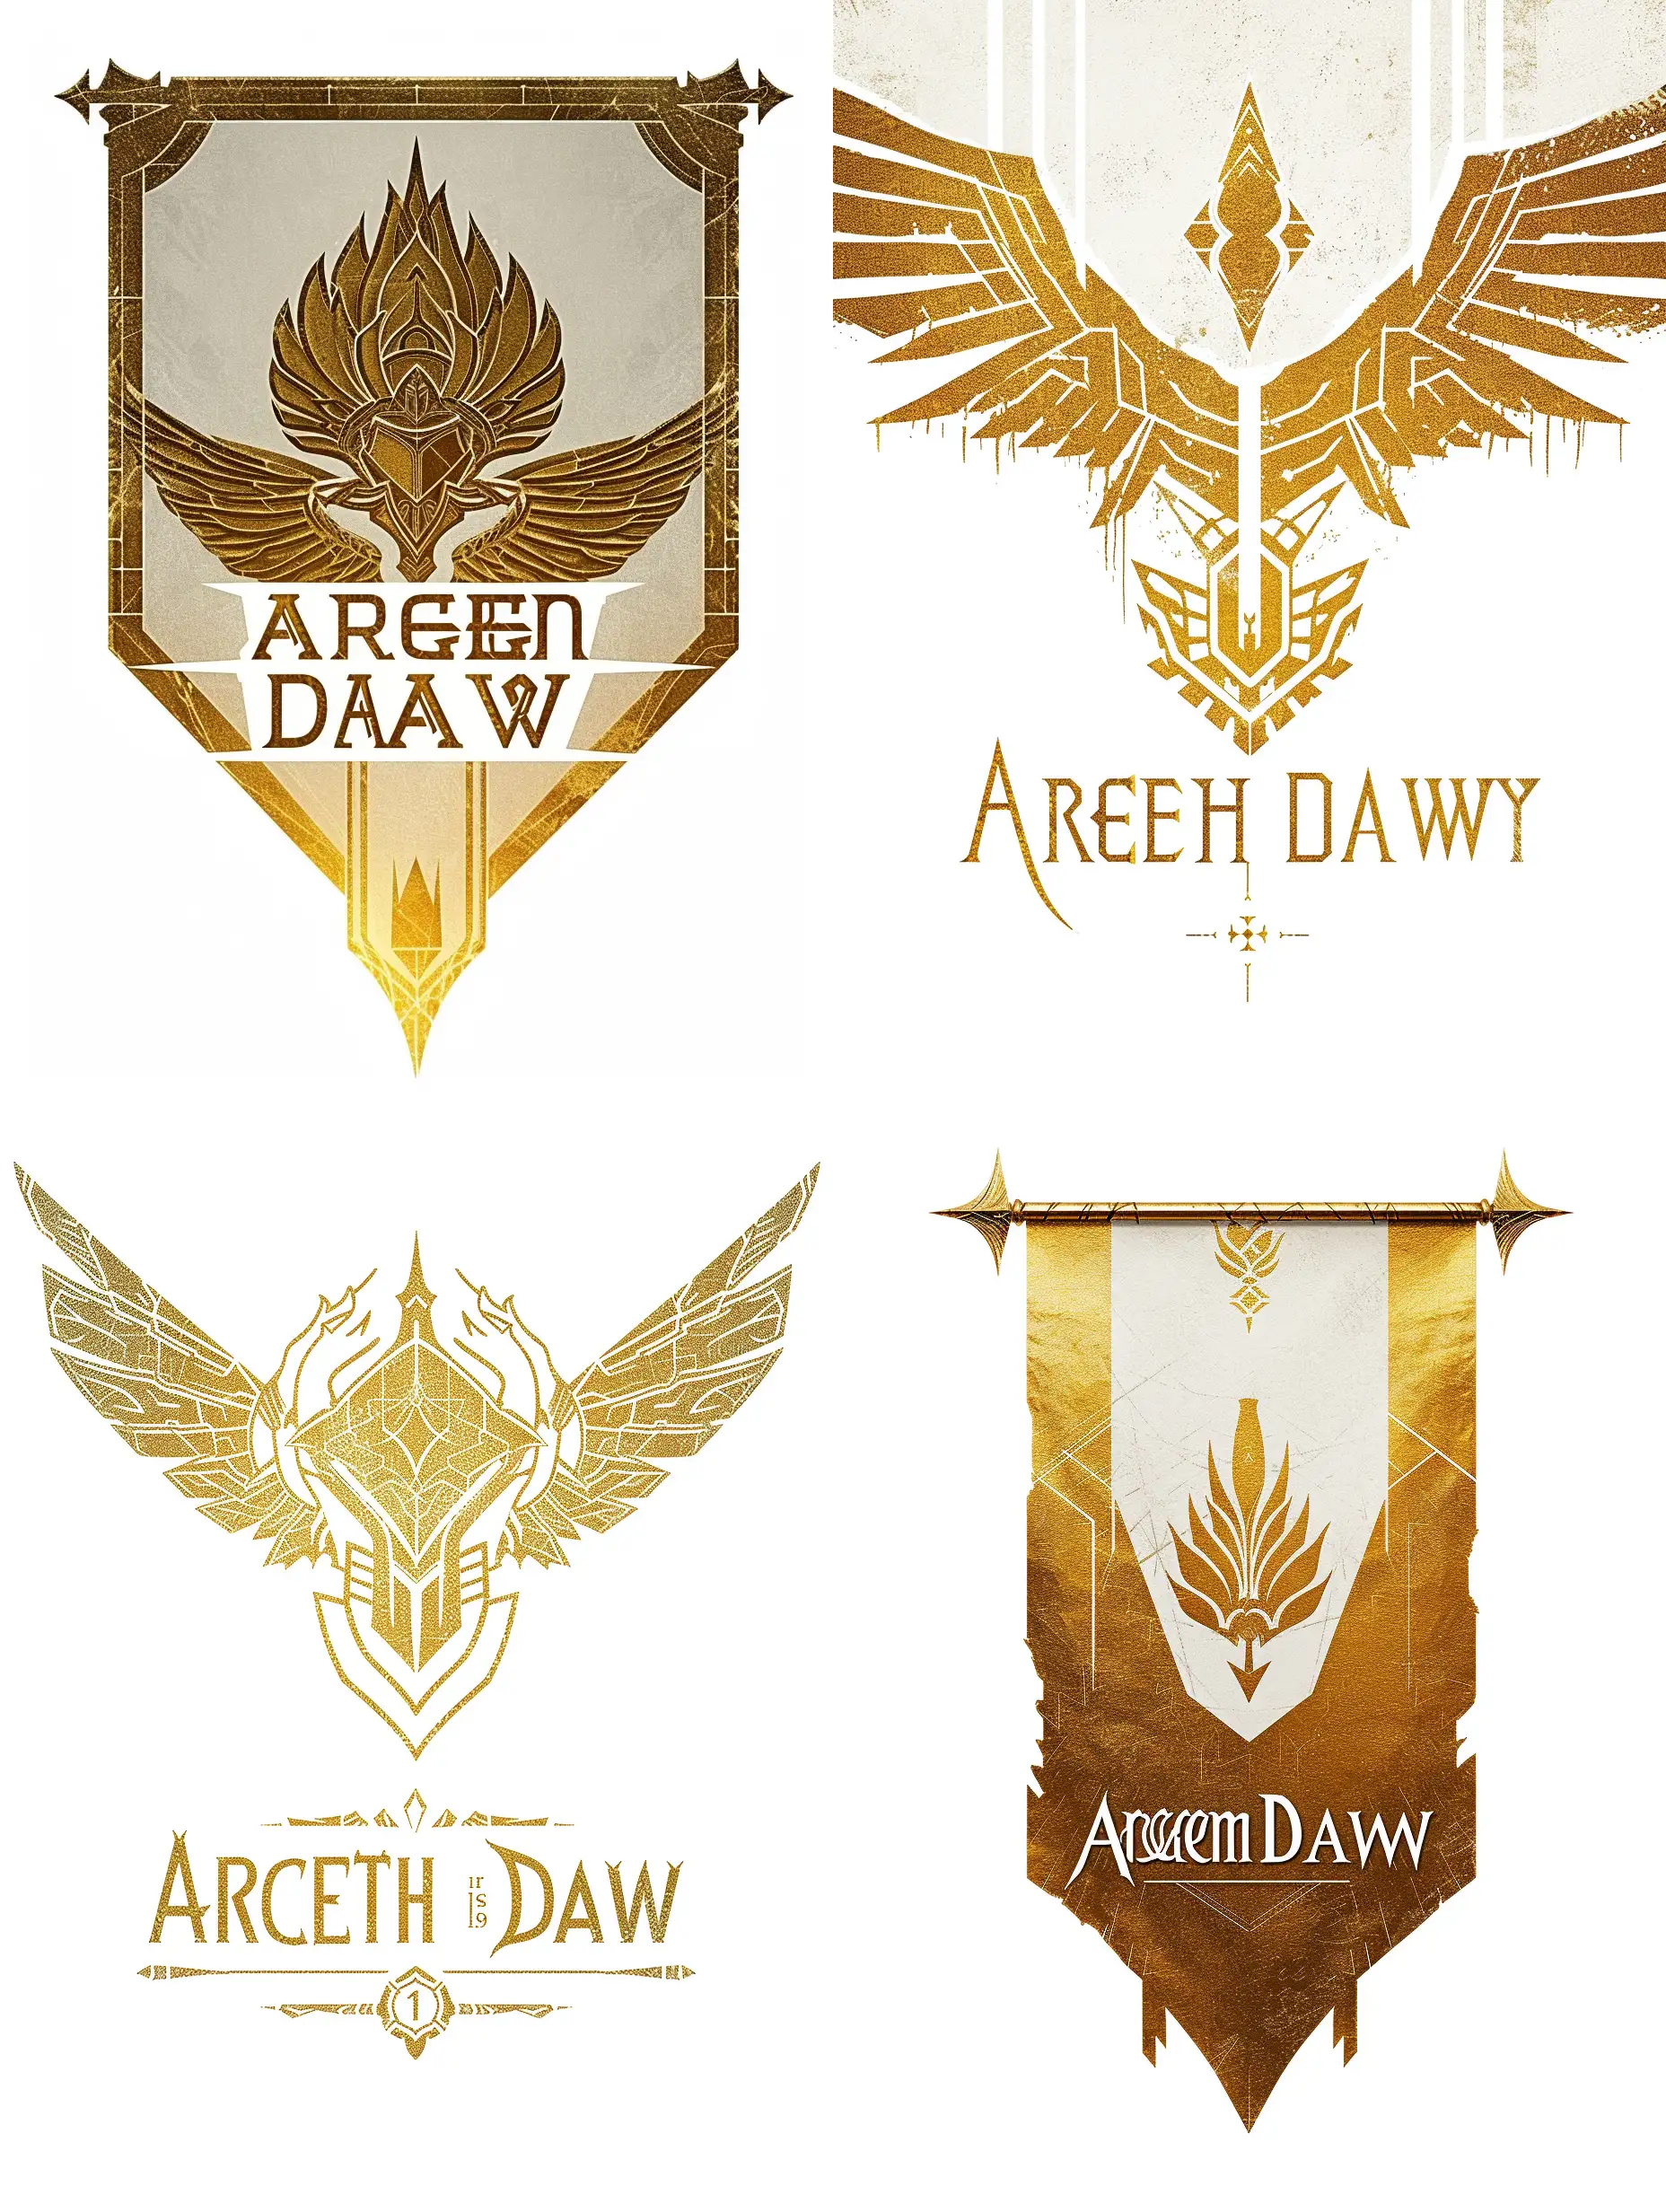 Gold and white banner for the "Argent Dawn" with a logo containing the text "Argent Dawn"